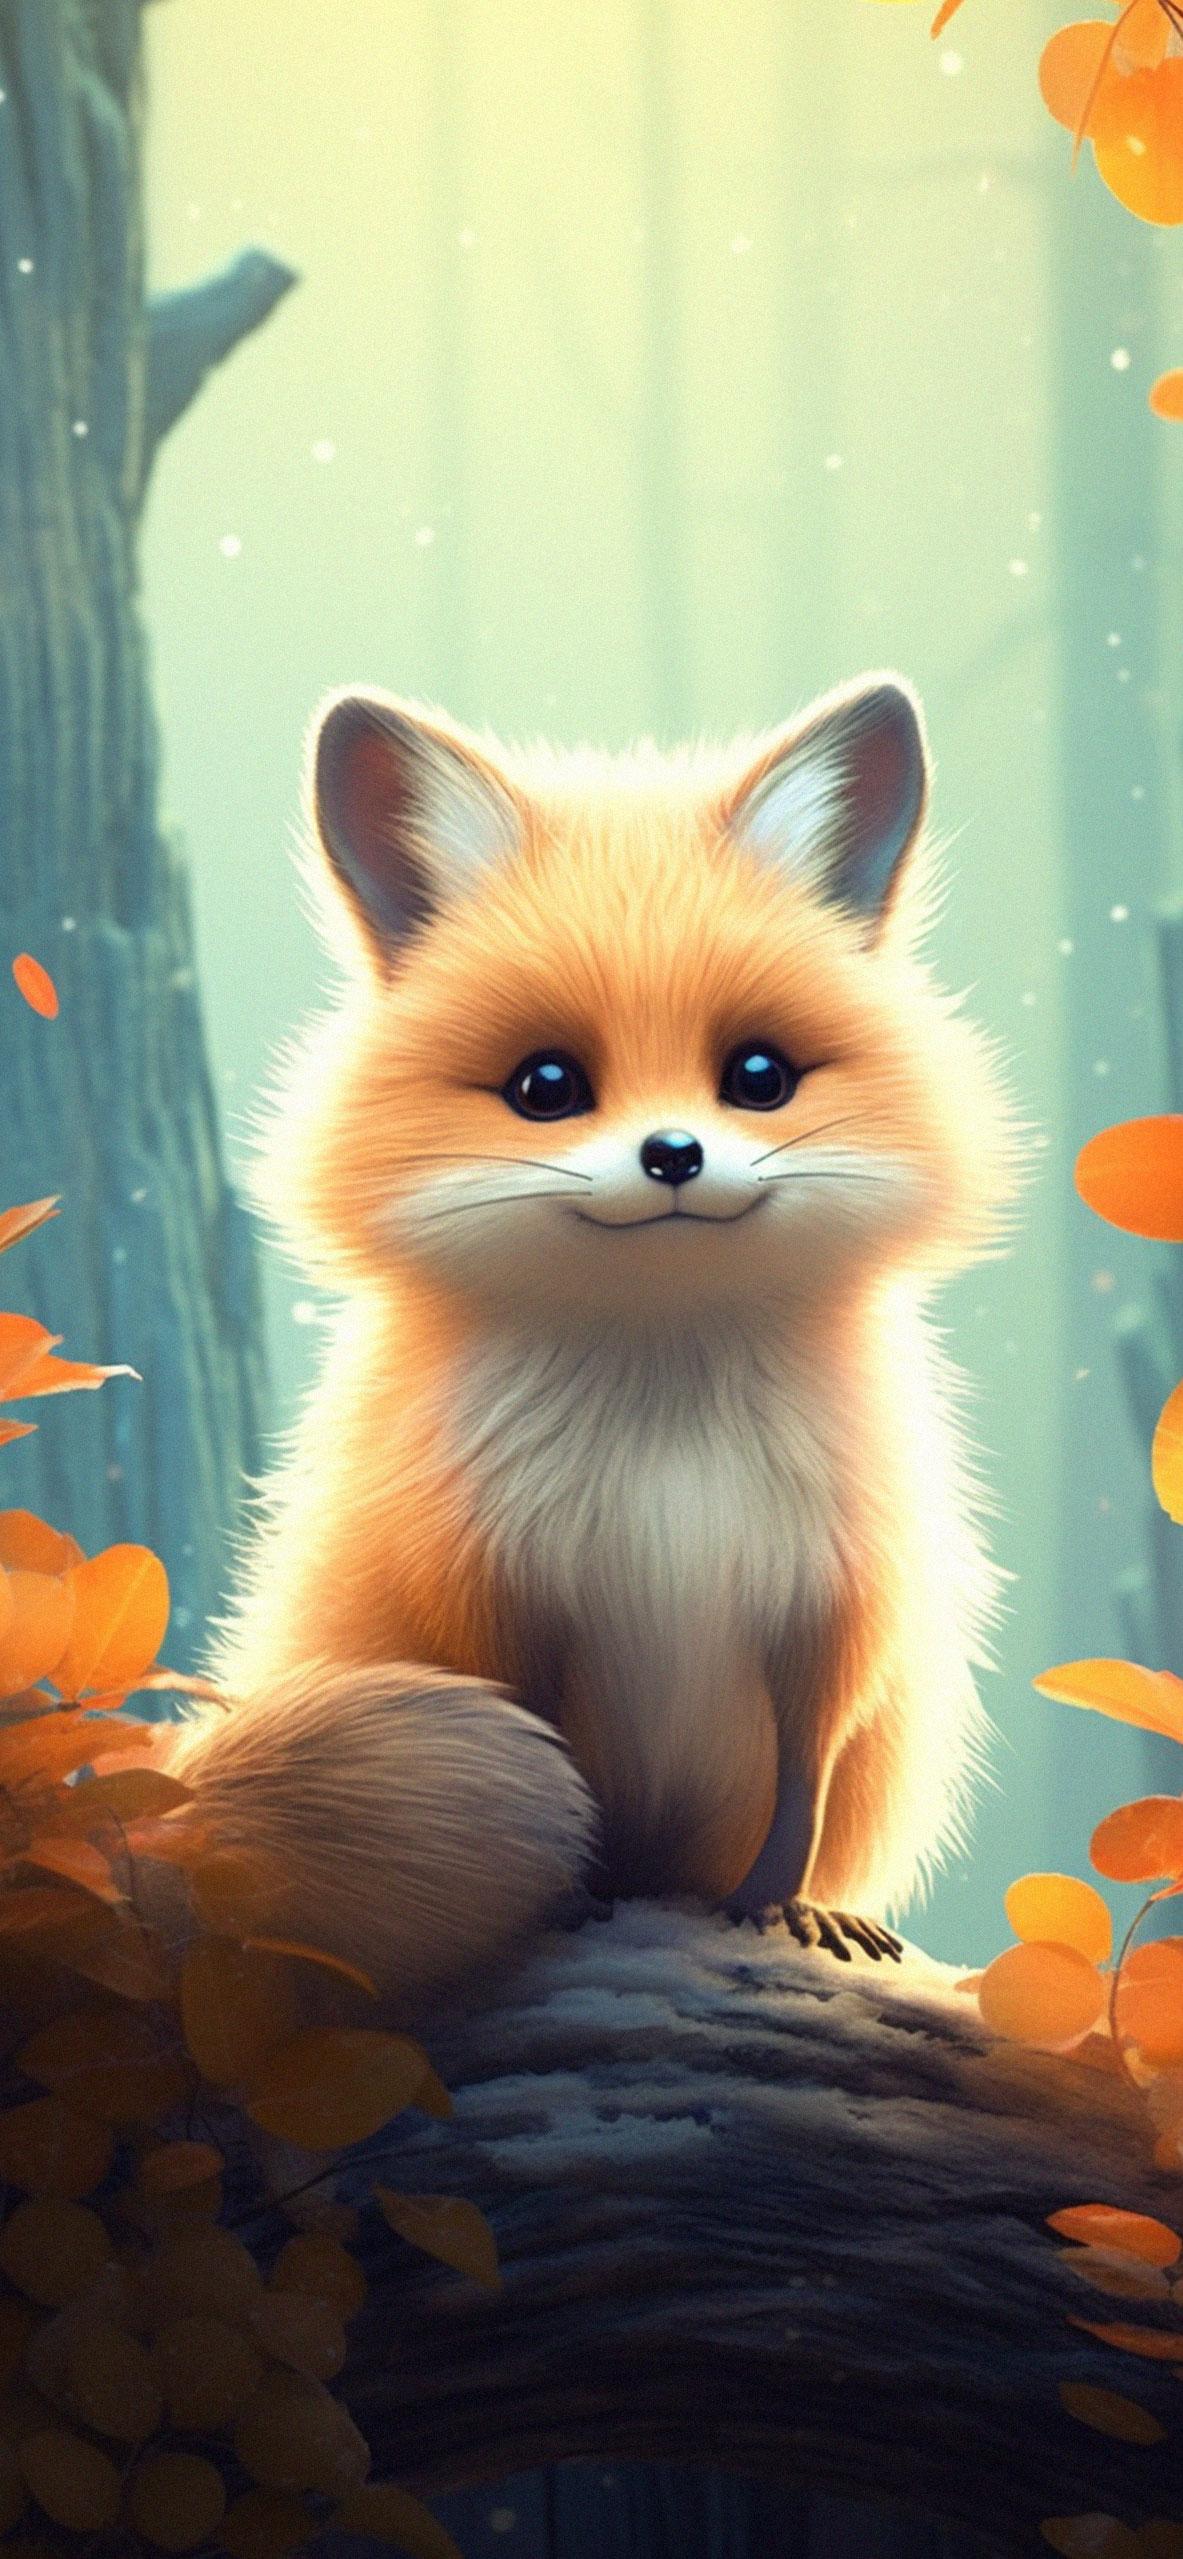 Cute Fox In Forest Art Wallpaper For iPhone